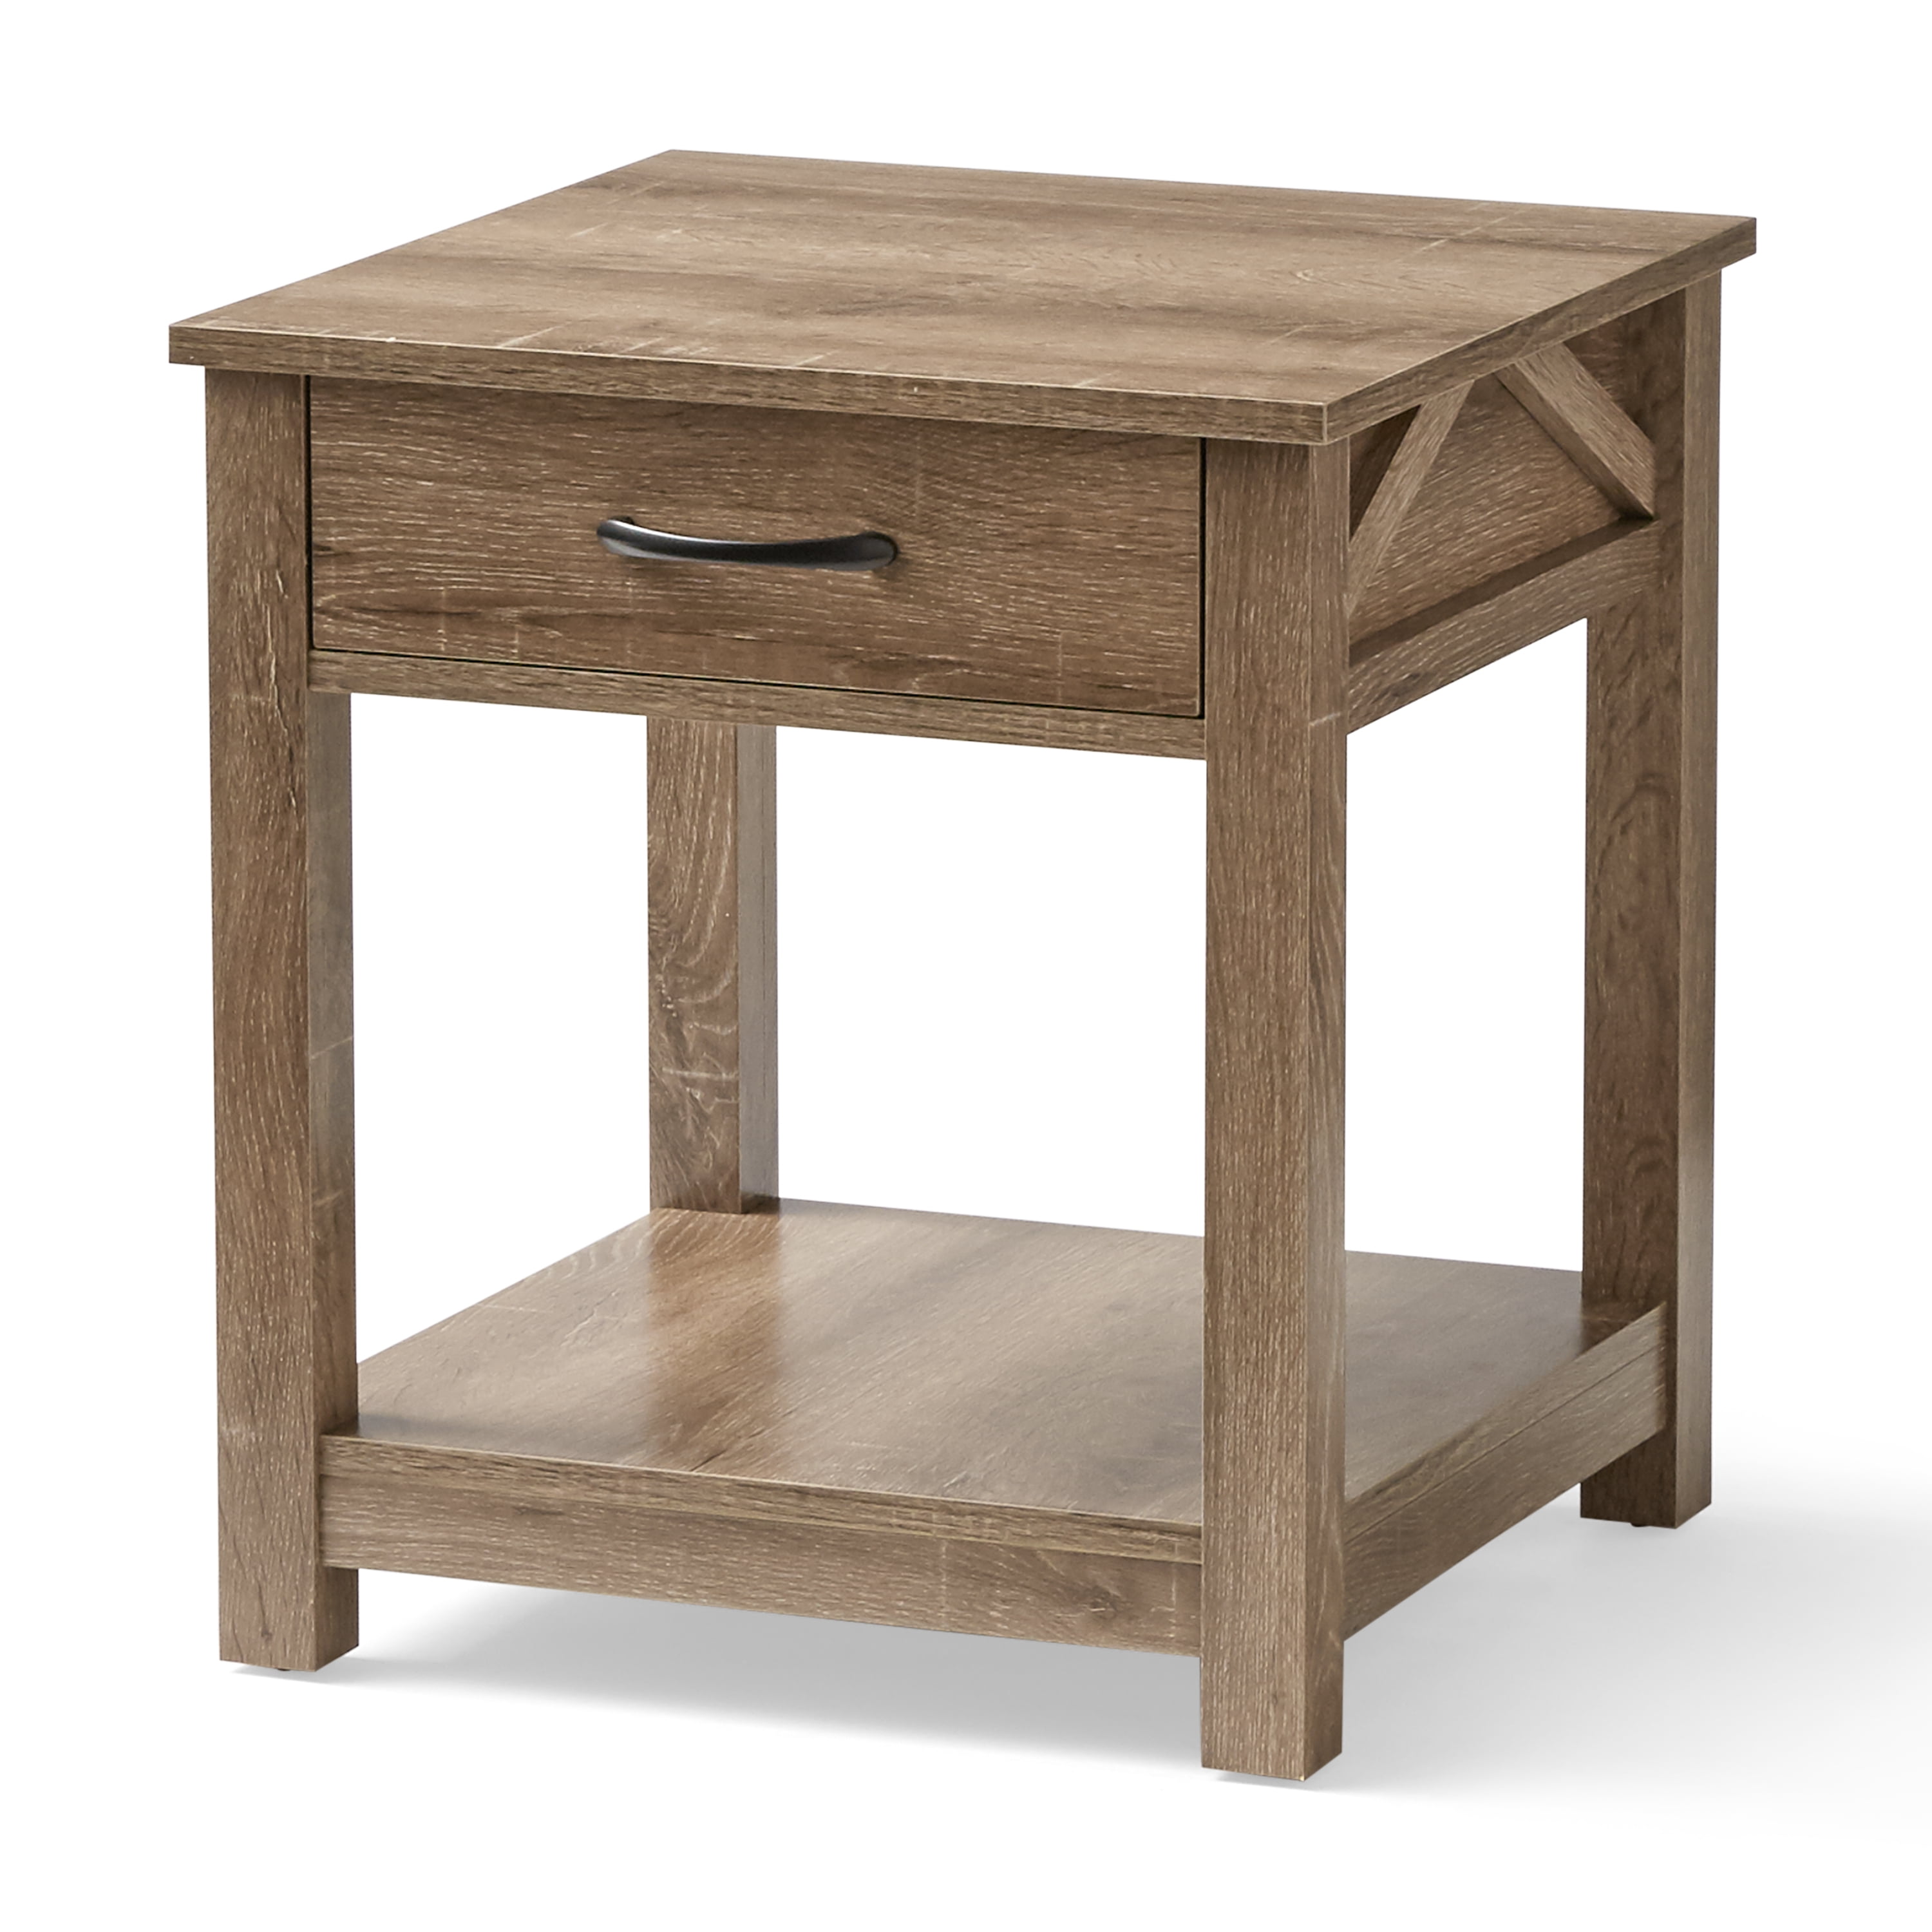 Mainstays Aston Mills Rustic Farmhouse End Table with 1 Drawer, Rustic